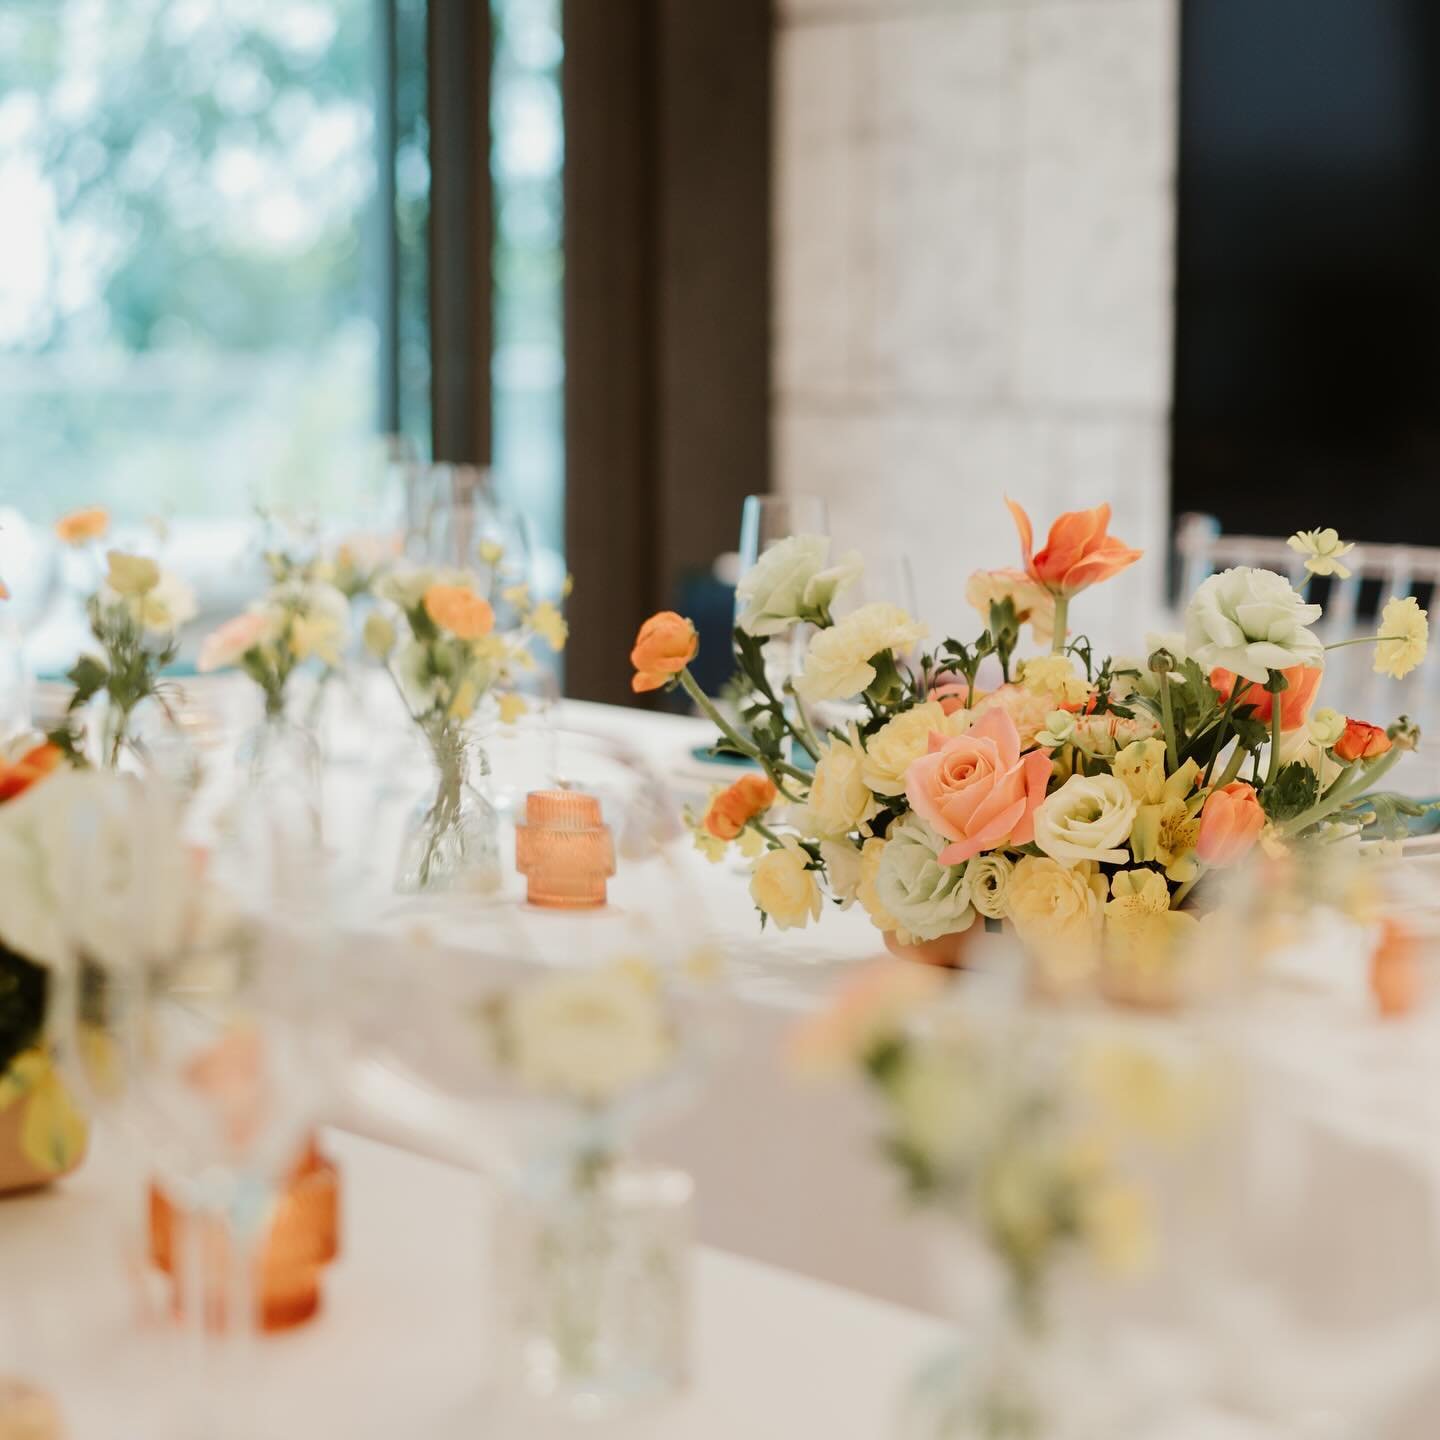 Our table styling for a wedding solemnisation at a private residence - featuring exquisite arrangements of vibrant yellow and orange florals that were thoughtfully curated. 

Let our dedicated team bring your dream wedding to life with our bespoke ta